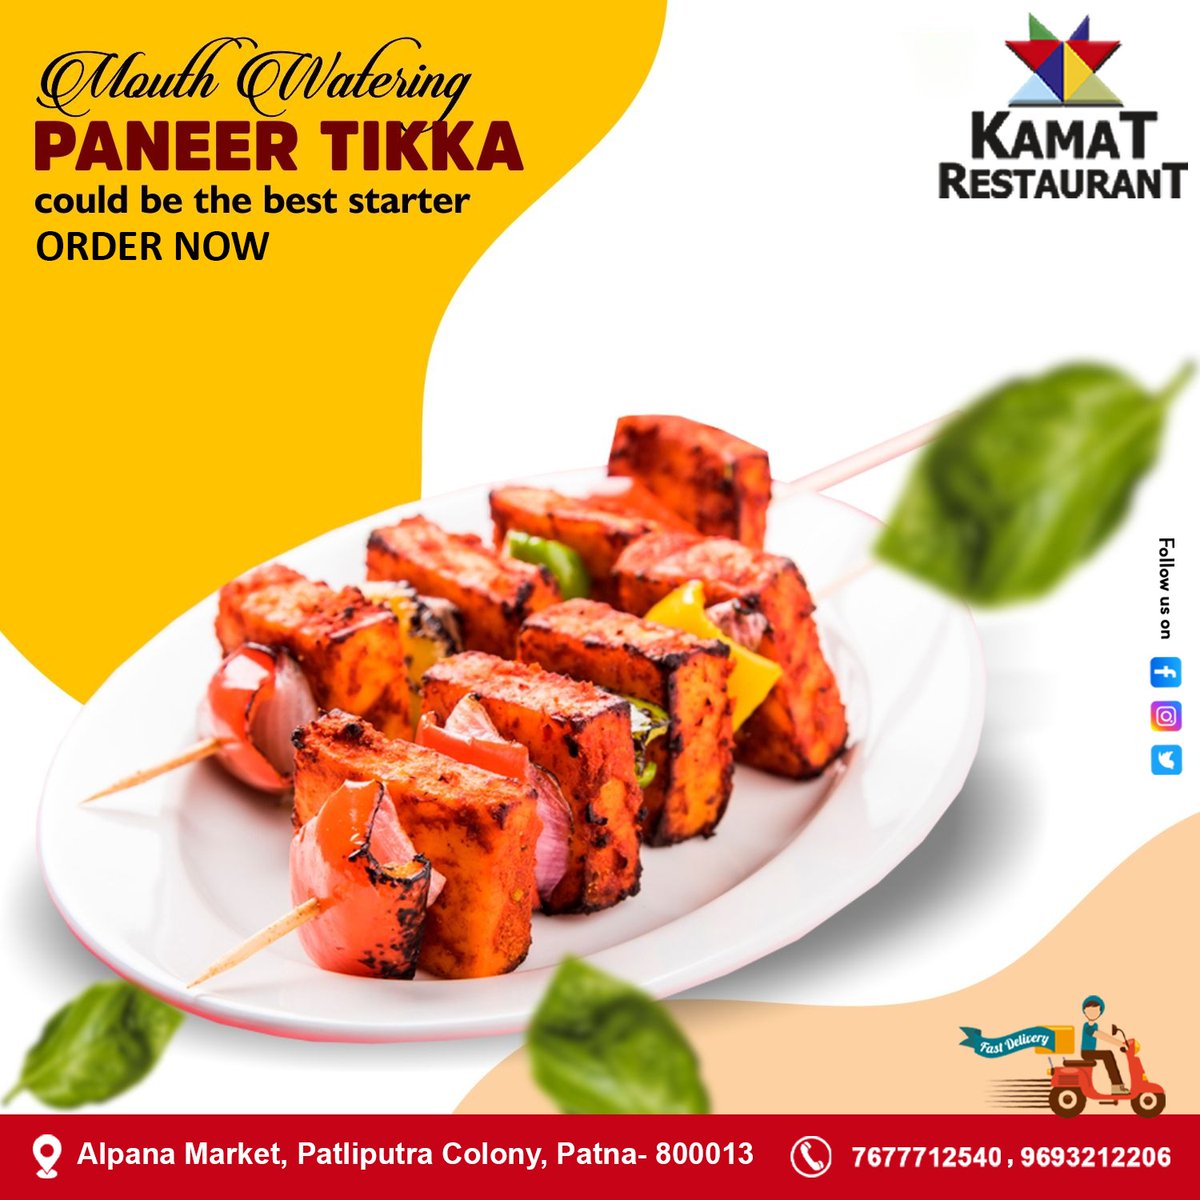 Mouth Watering PANEER TIKKA 
could be the best starter...!
' ORDER NOW ' Please call on :- 𝟎𝟔𝟏𝟐 - 𝟐𝟐𝟔𝟔𝟐𝟎𝟕 +𝟗𝟏 𝟕𝟔𝟕𝟕𝟕𝟏𝟐𝟓𝟒𝟎, +𝟗𝟏 𝟗𝟔𝟗𝟑𝟐𝟏𝟐𝟐𝟎𝟔
#homedelivery #paneertikka #kamatrestaurant #deliciousrecipes #southindian #yummy #Foodie #FoodInTheAir